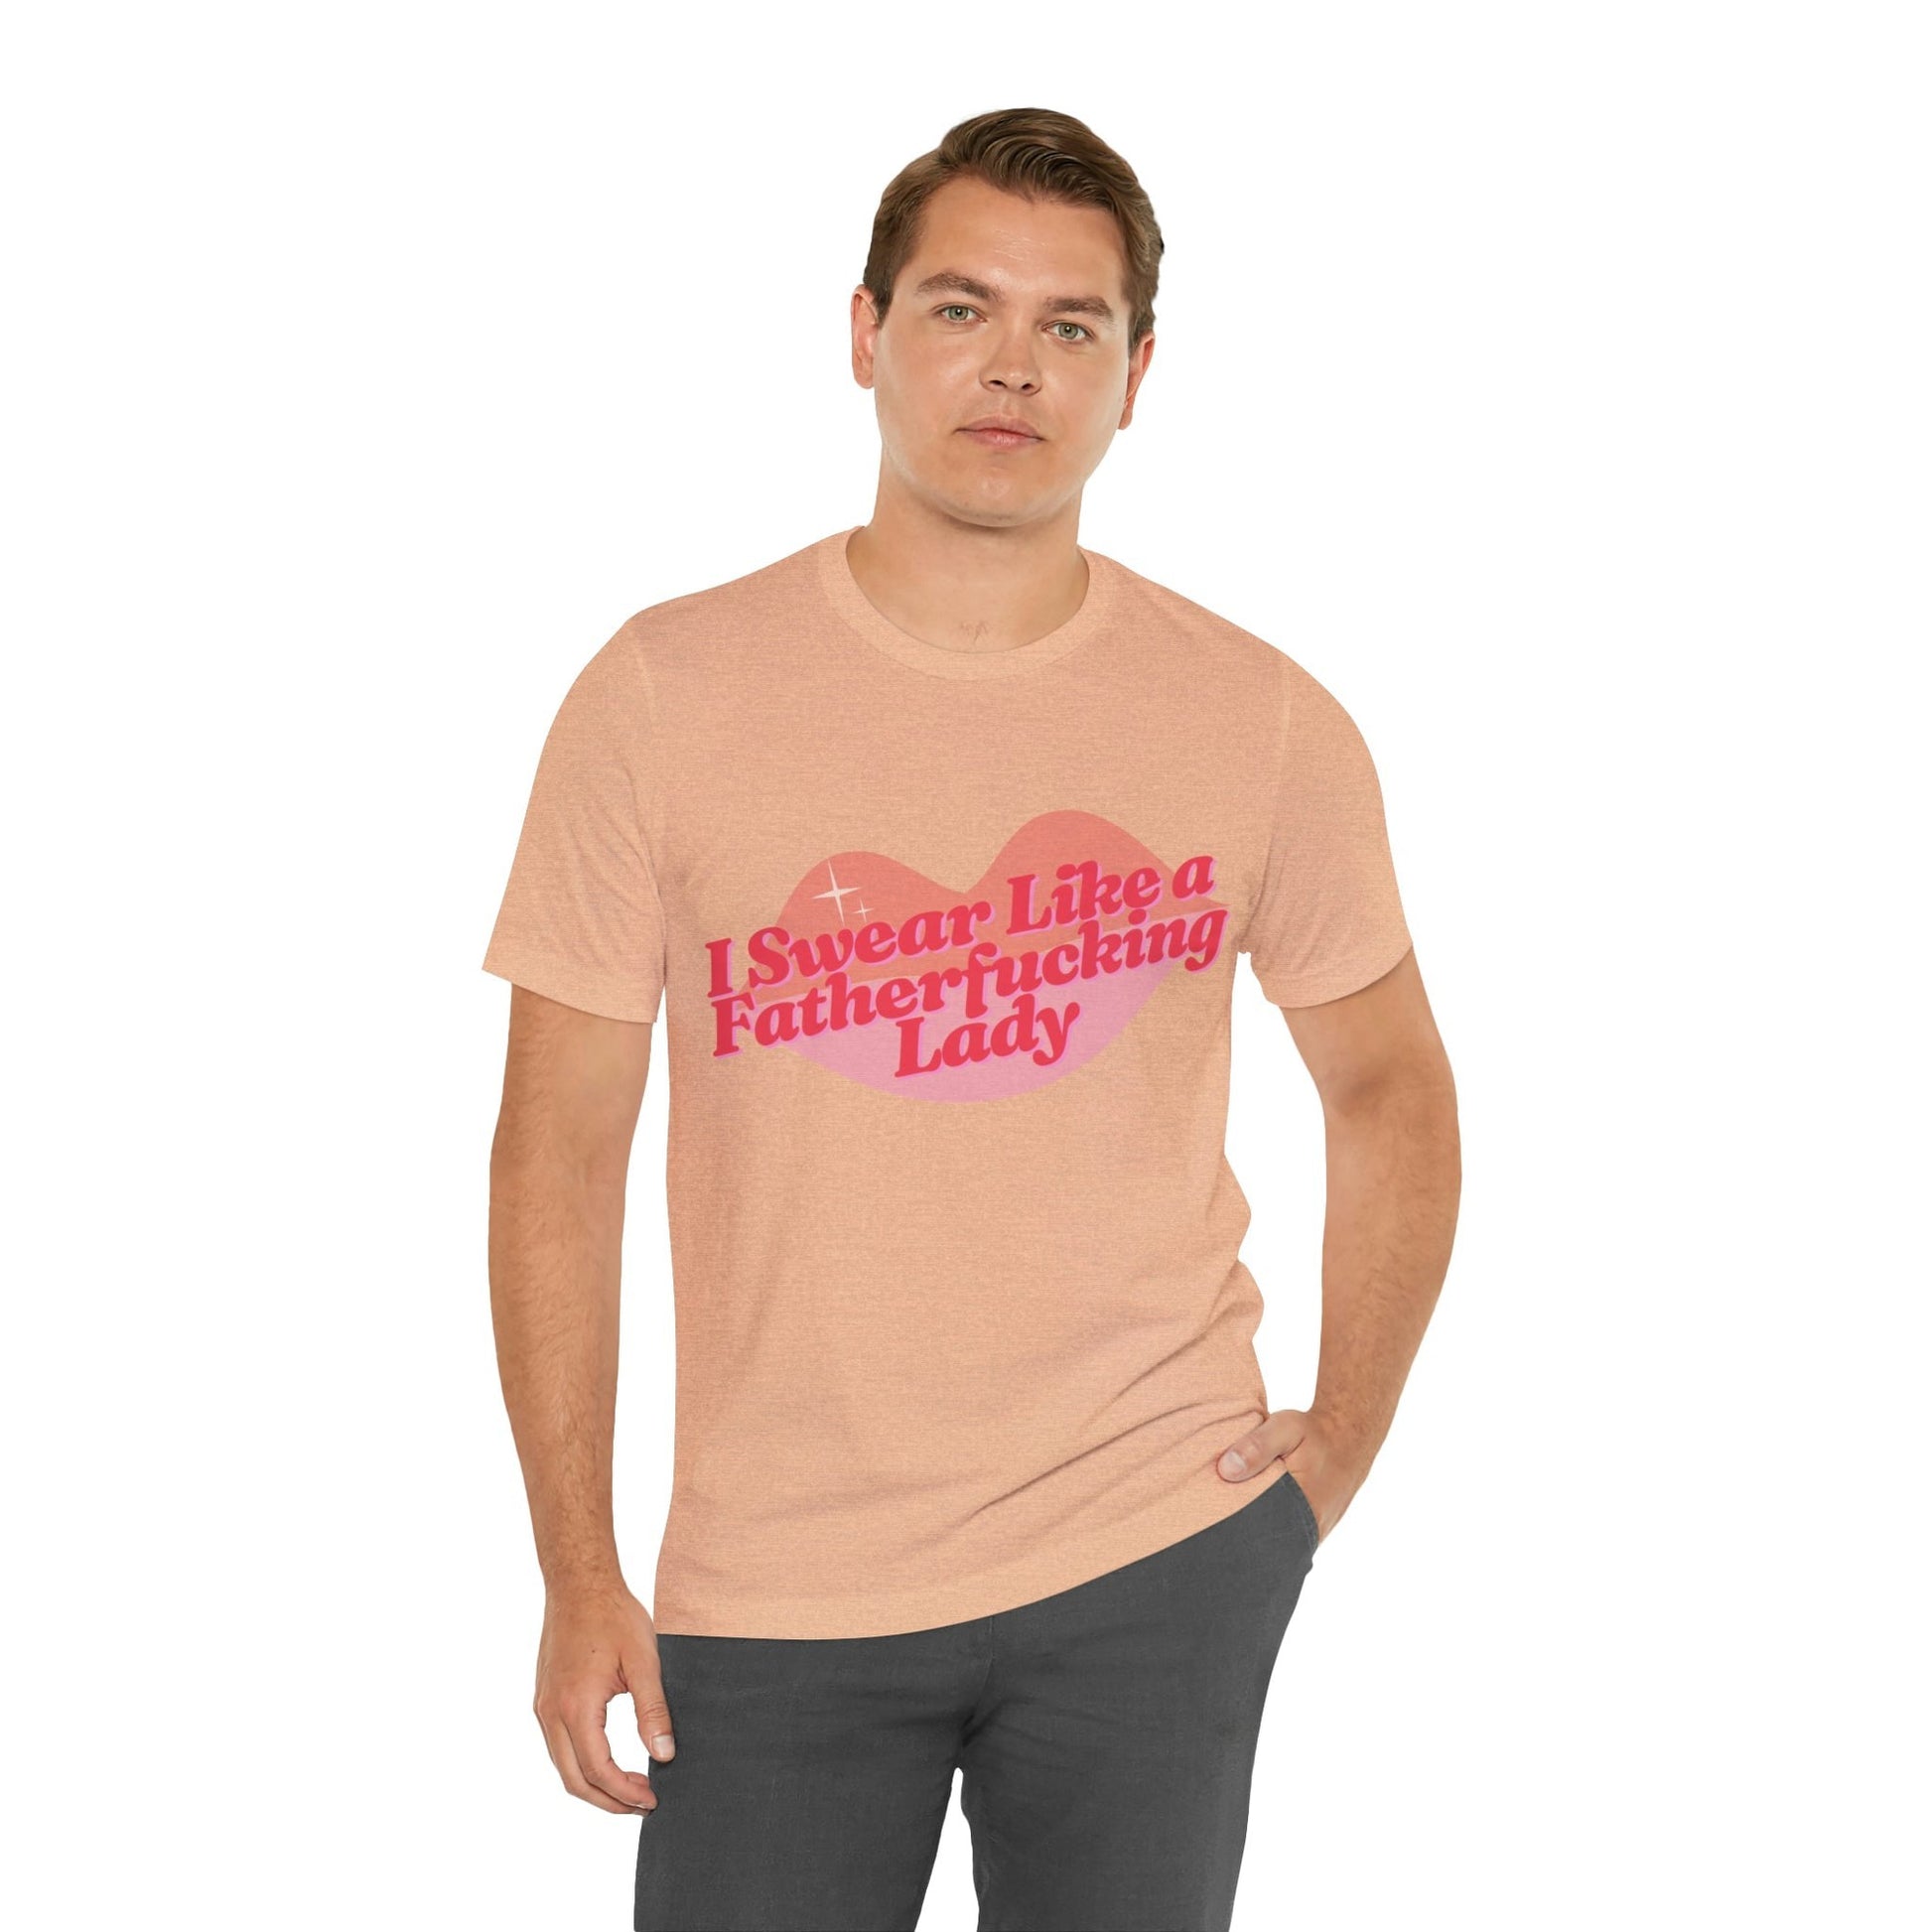 I Swear Like a Fatherf💋cking Lady Jersey Short Sleeve Tee [Multiple Color Options]